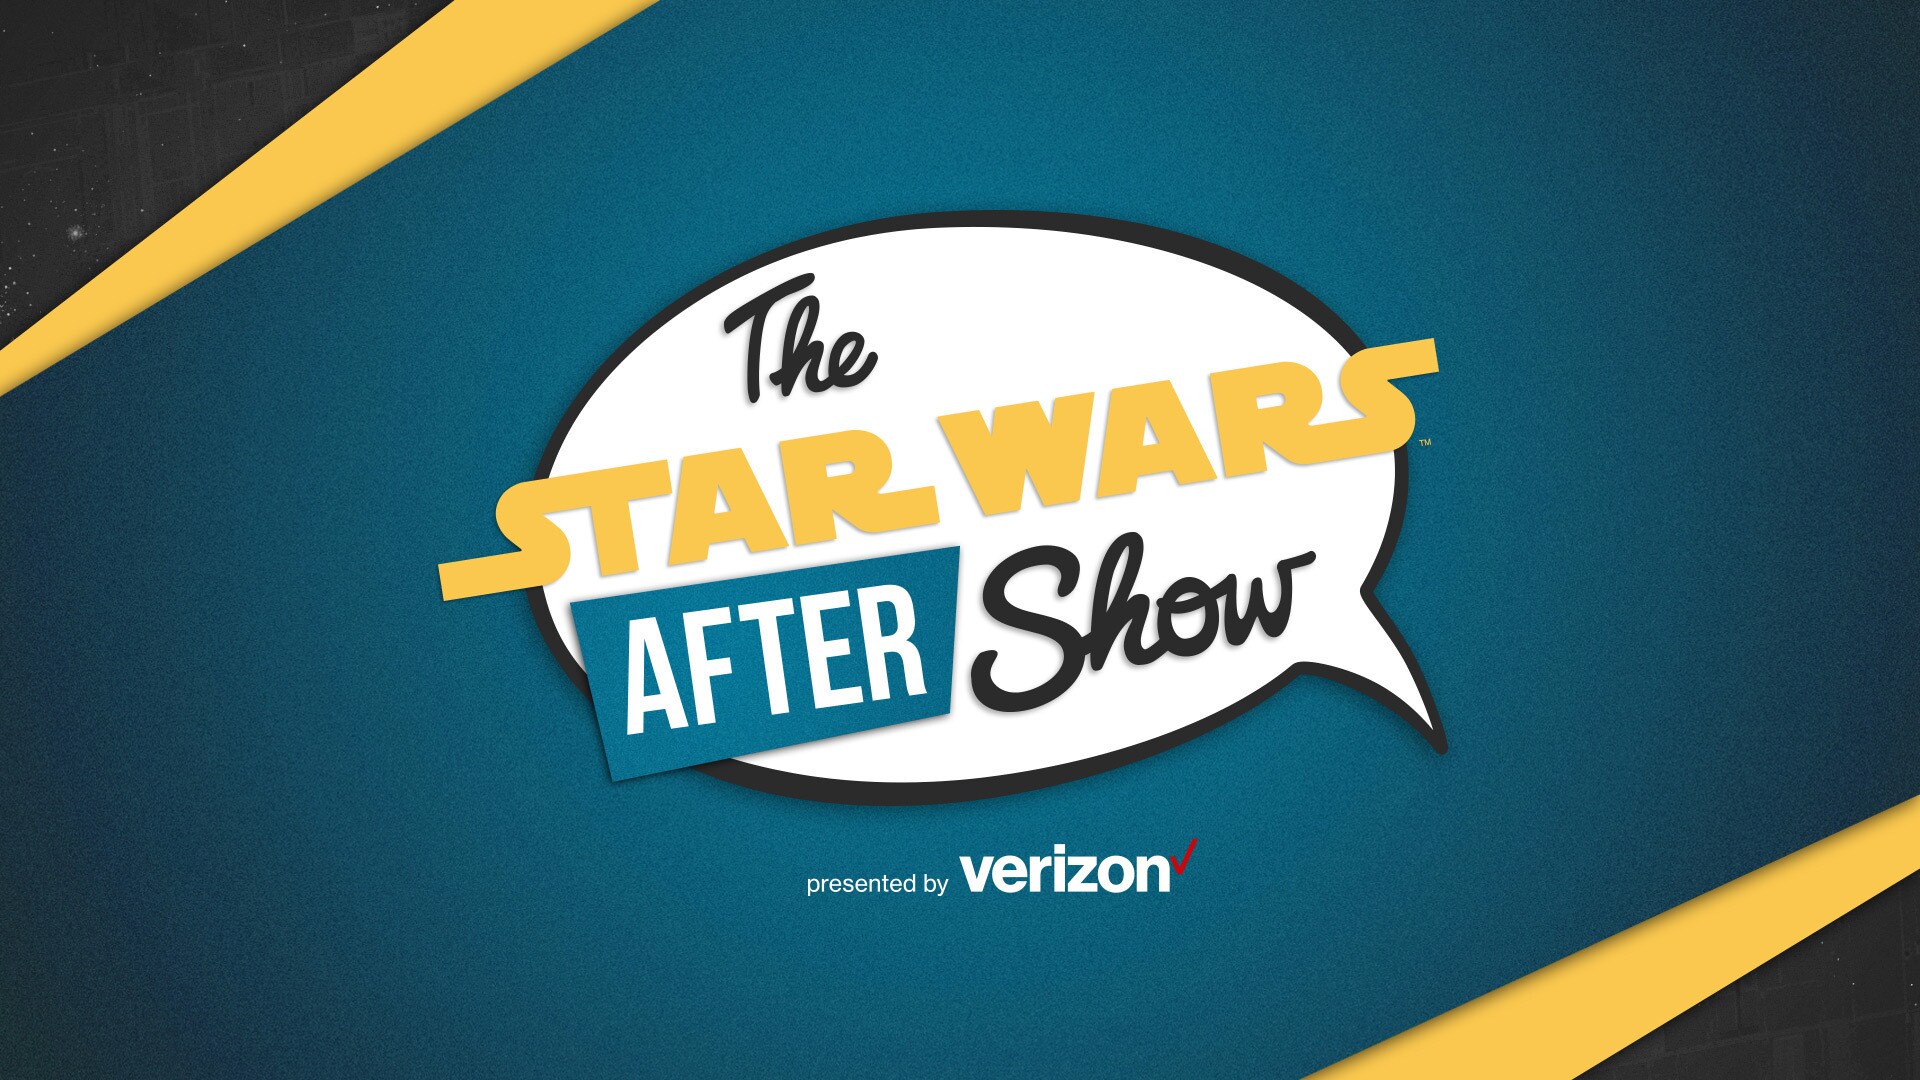 Announcing The Star Wars After Show